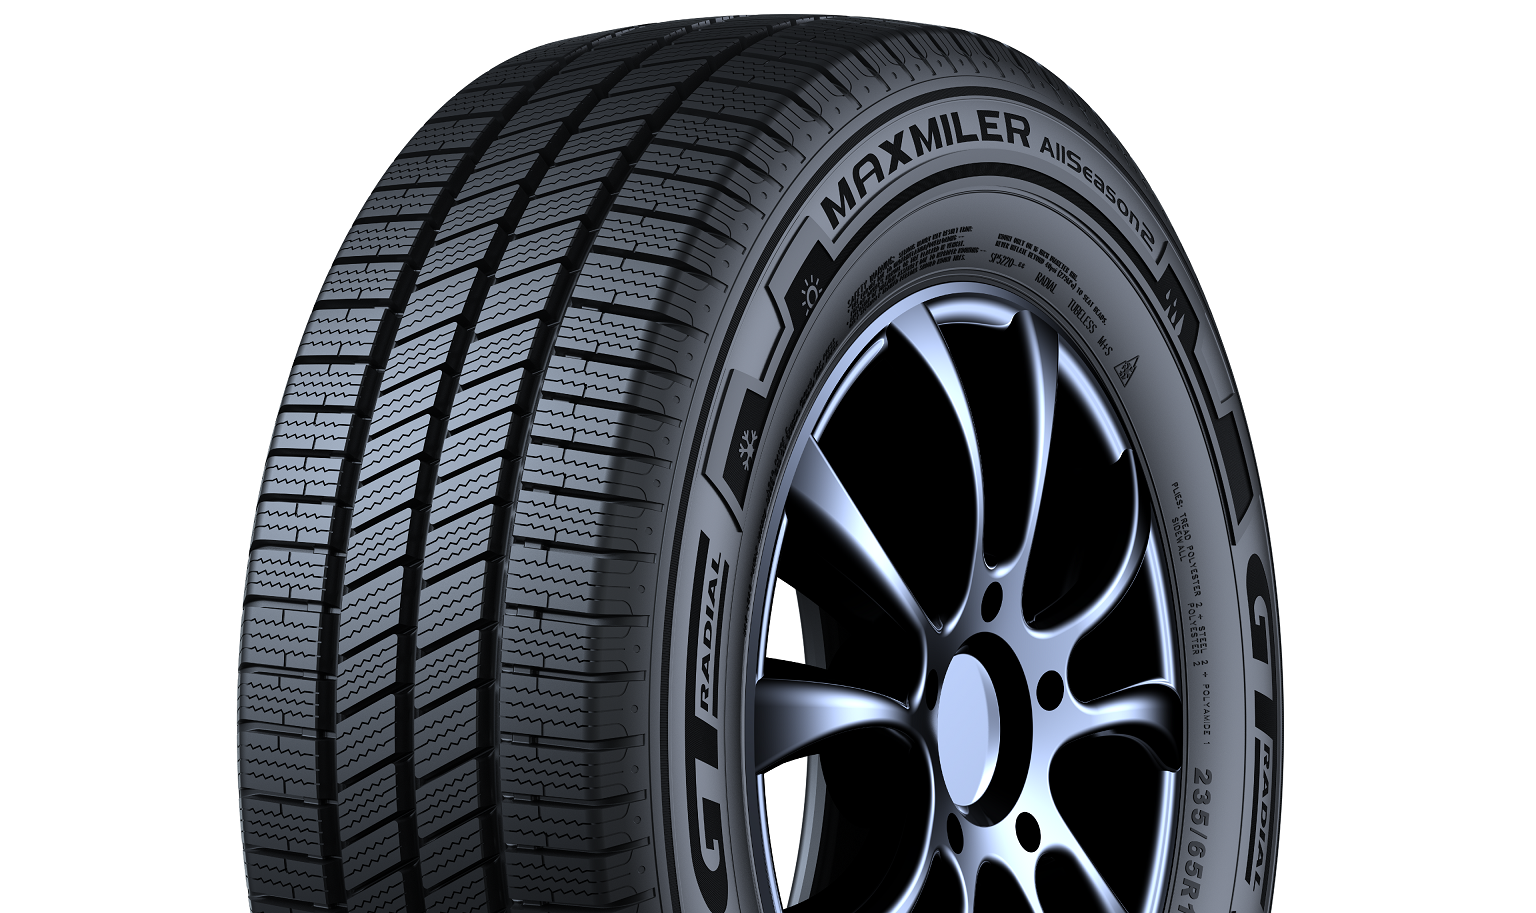 GT Radial Maxmiler AllSeason2 launched with A-grade wet braking